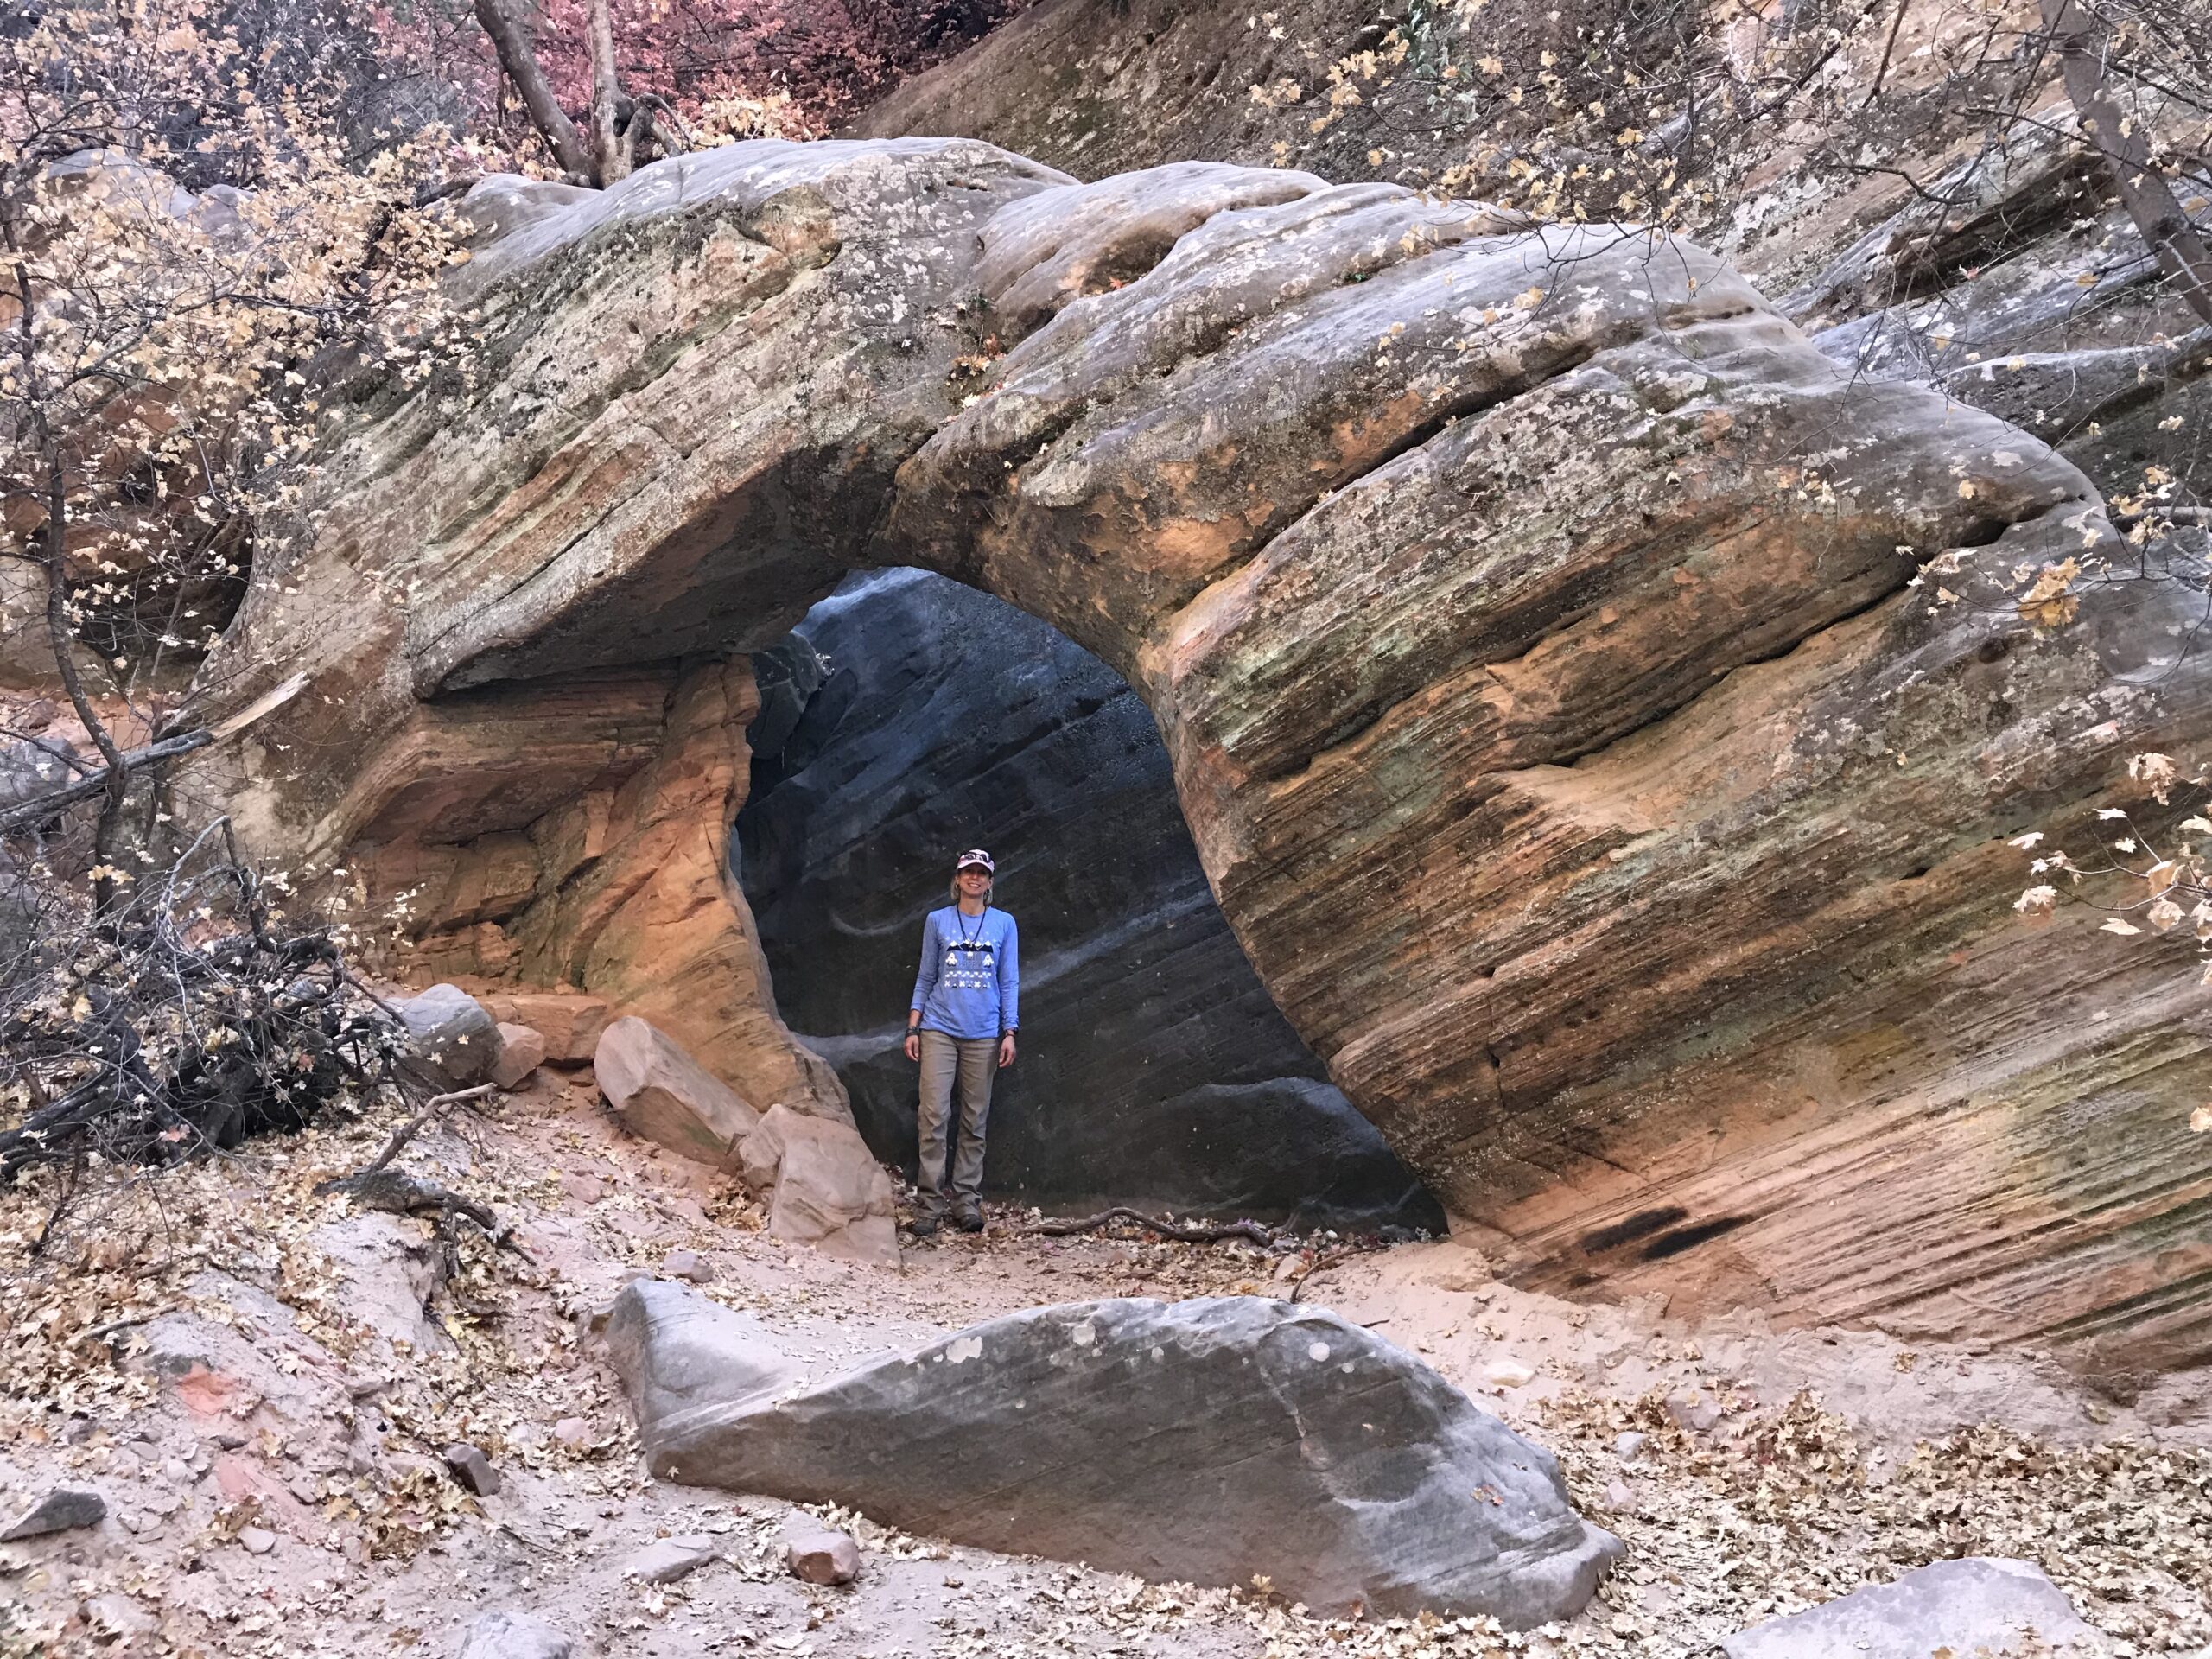 Find the Hidden Arch while hiking in Zion National Park.